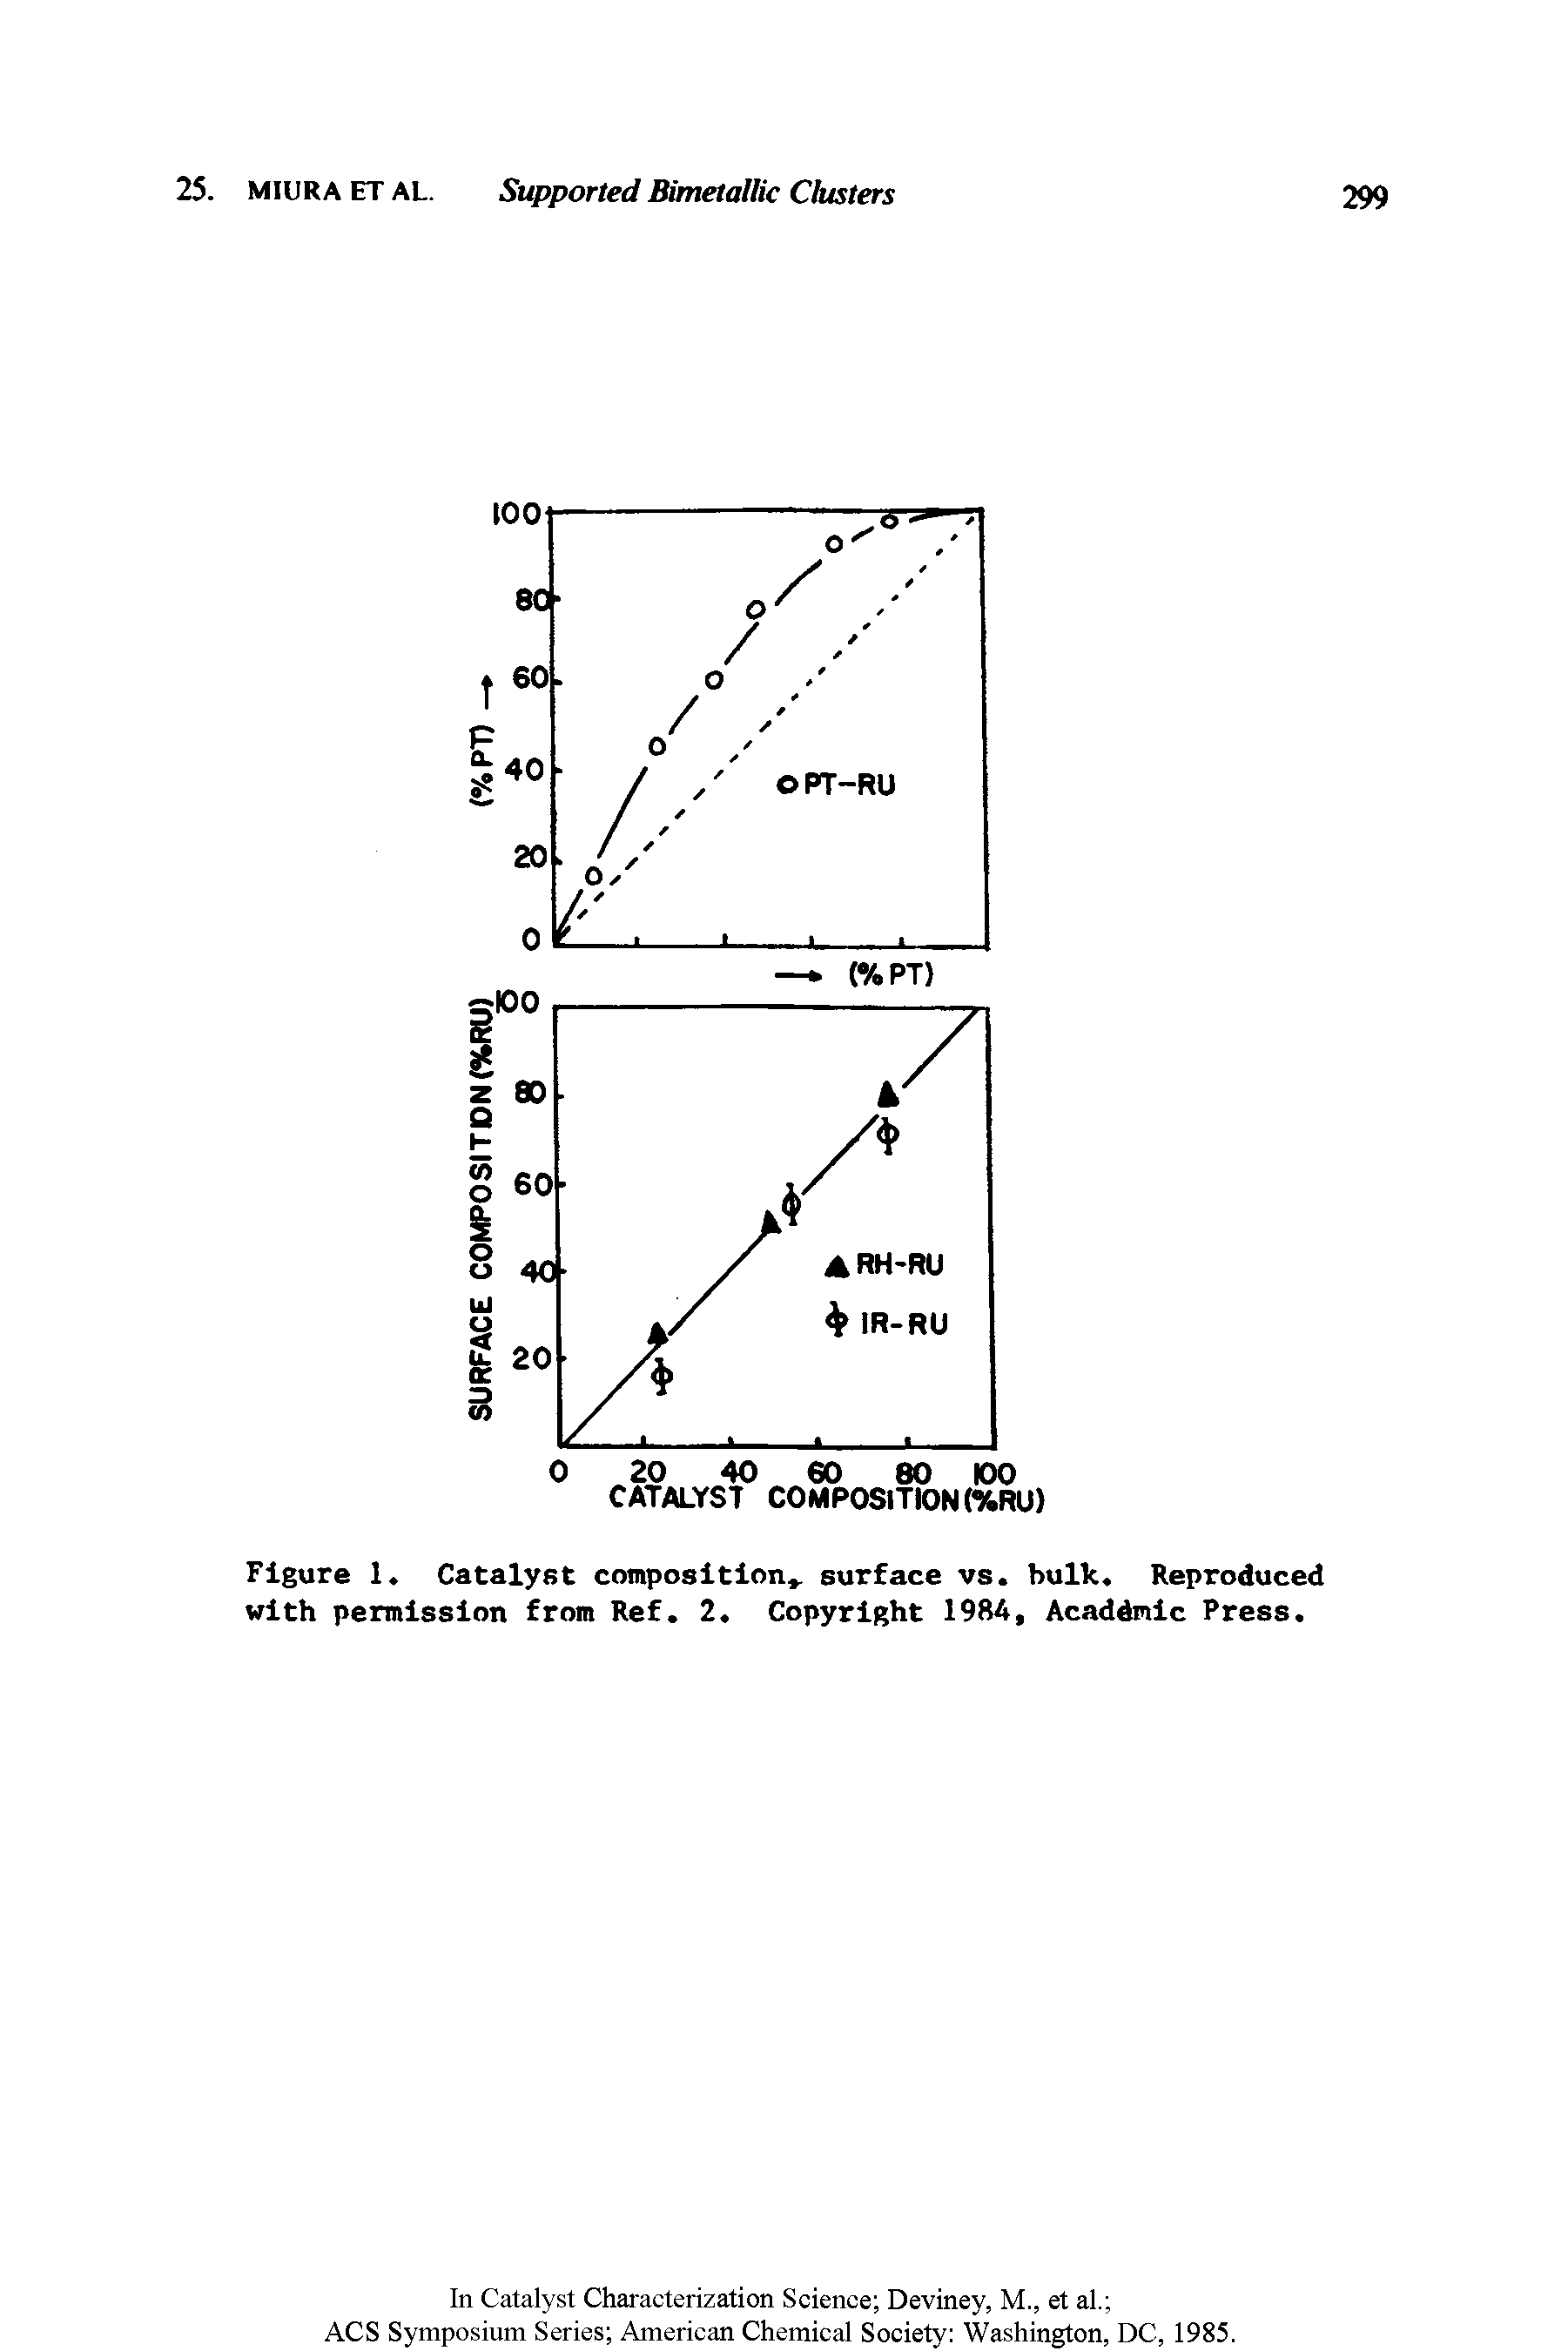 Figure 1. Catalyst composition surface vs. bulk. Reproduced with permission from Ref. 2. Copyright 198A, Acaddmic Press.